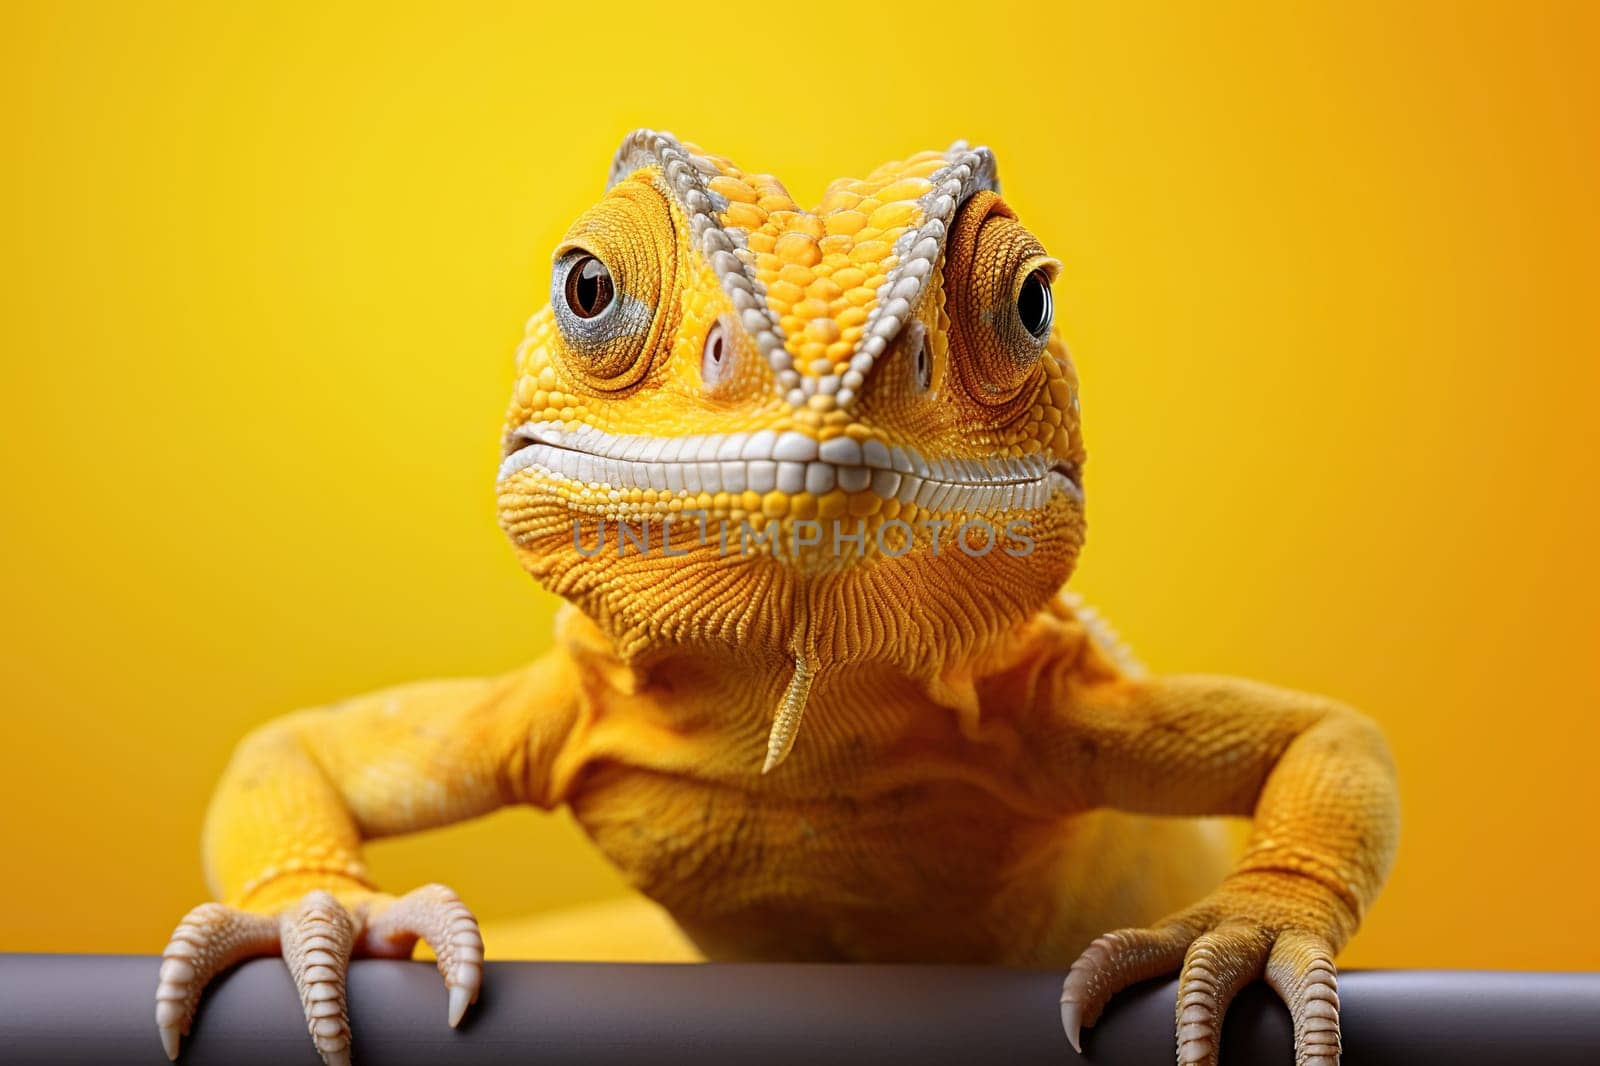 Bright yellow chameleon on a yellow background.